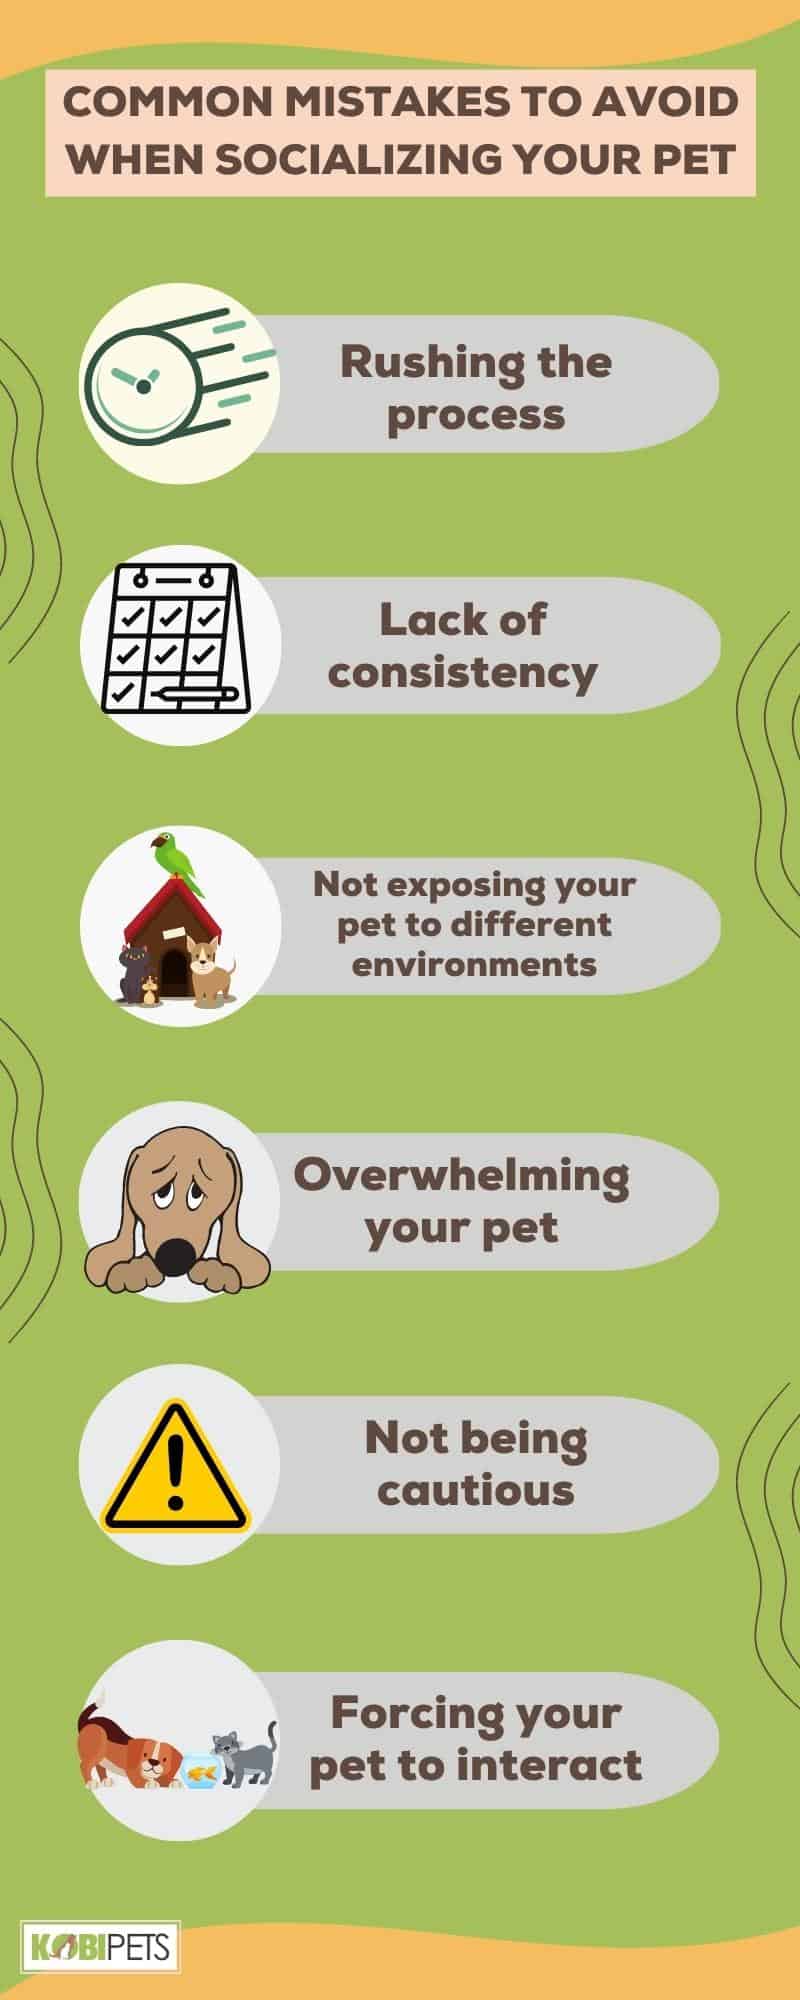 Common Mistakes to avoid when socializing your pets